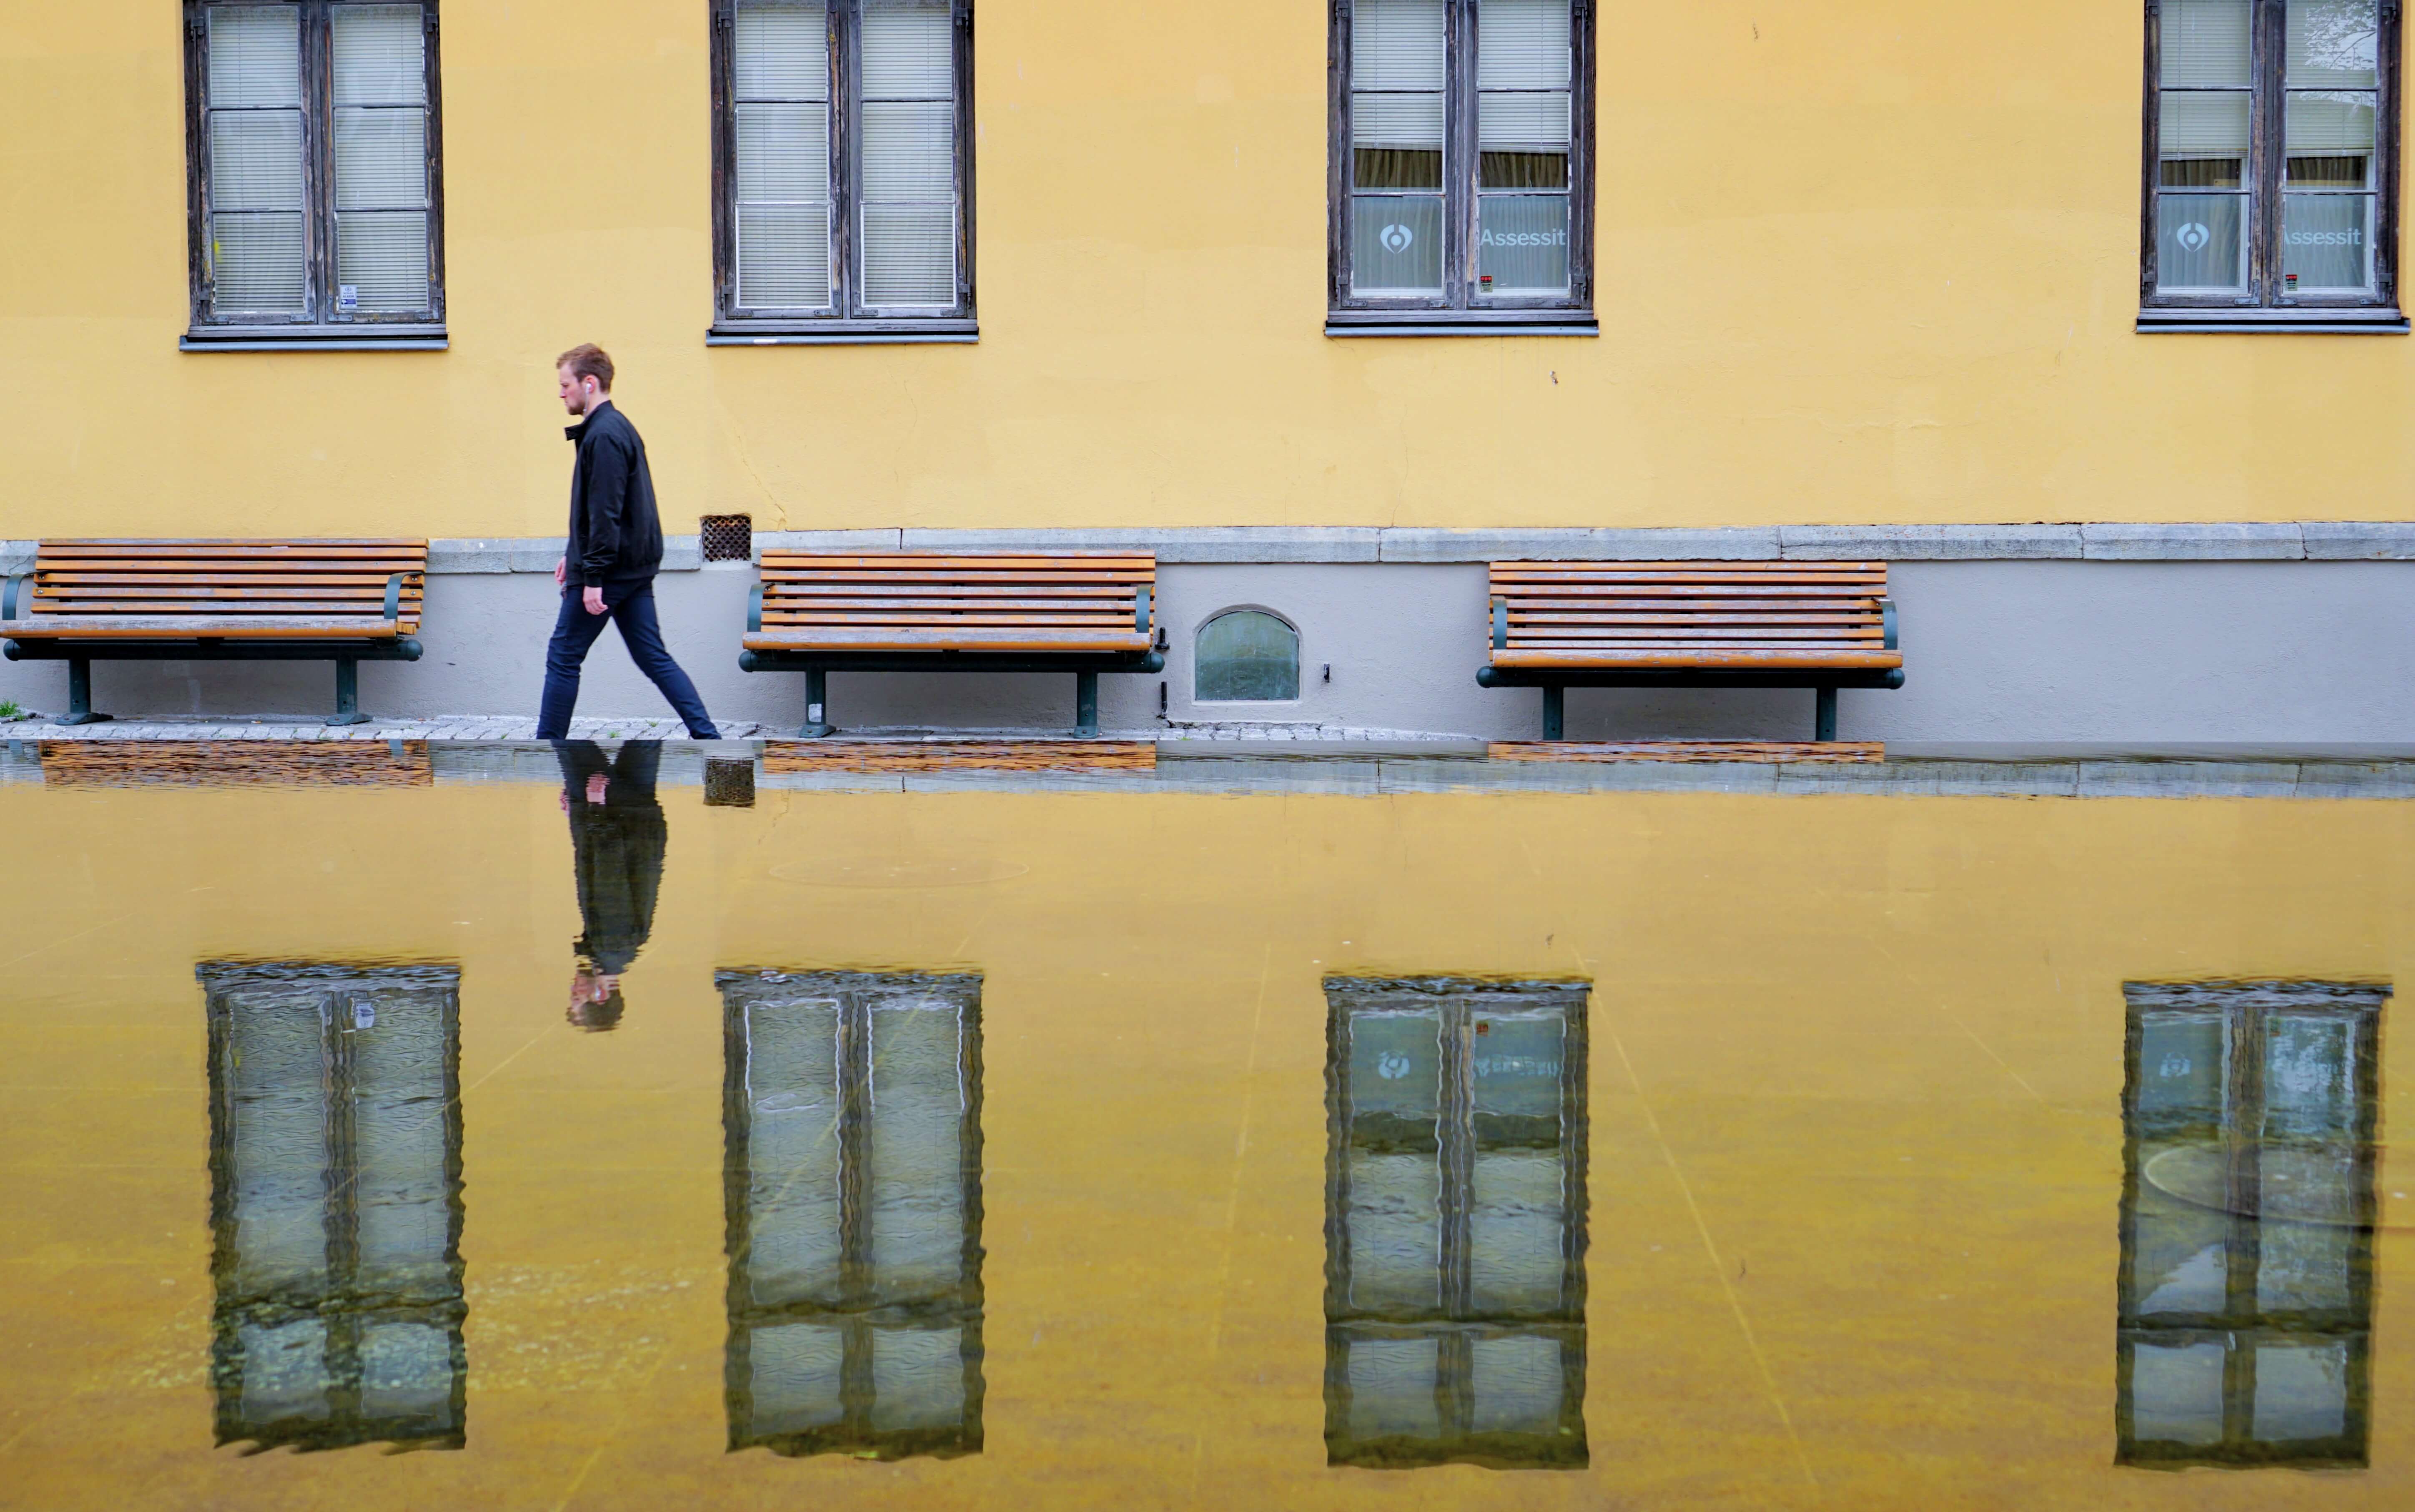 a man walking next to a yellow building